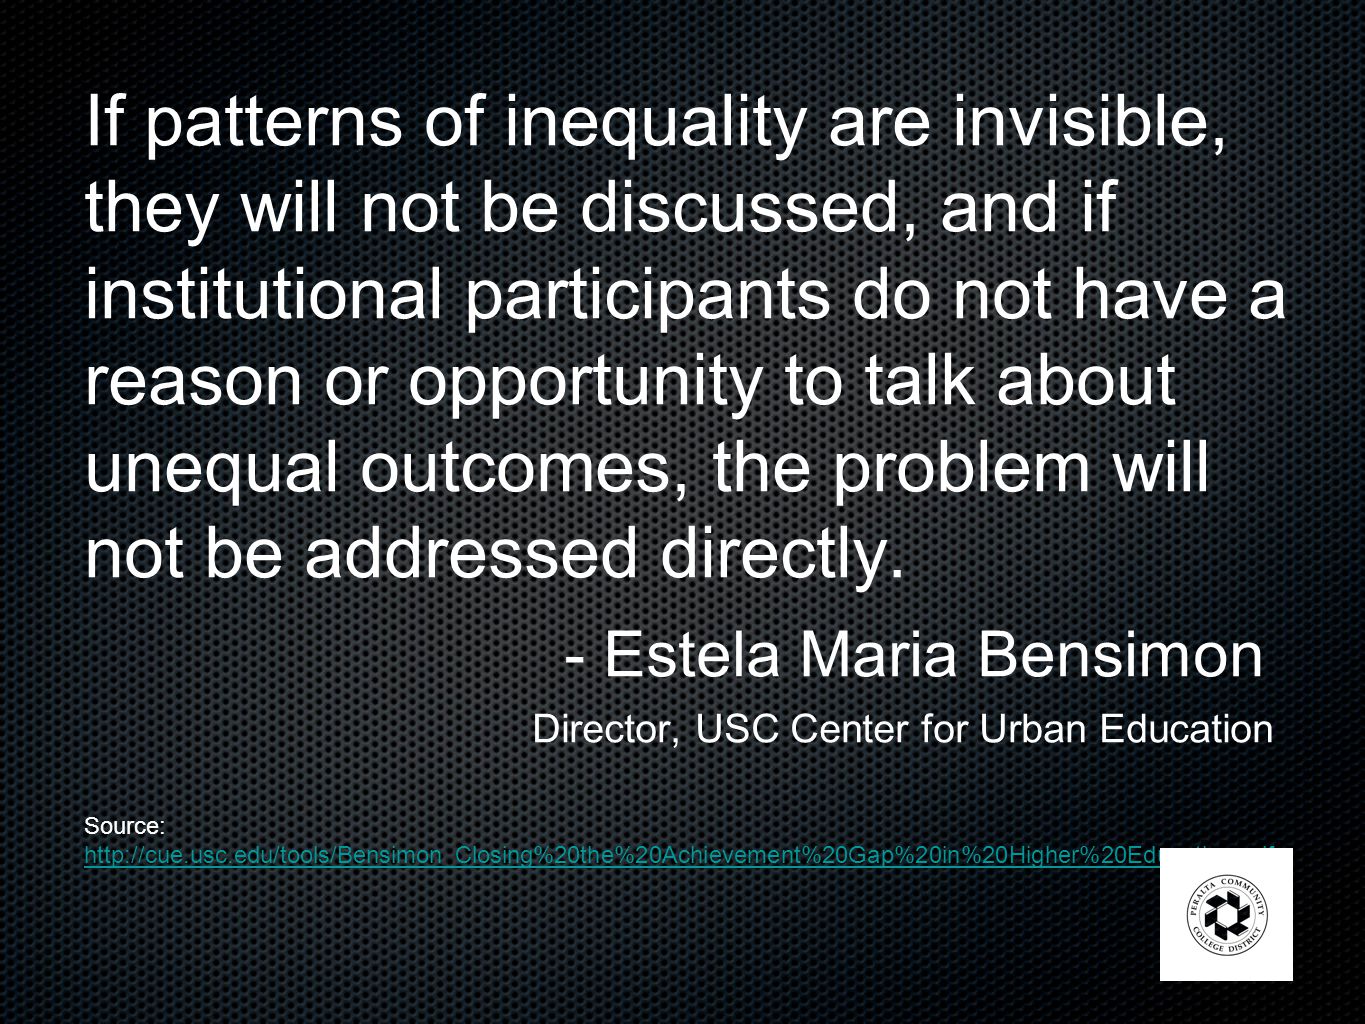 If patterns of inequality are invisible, they will not be discussed, and if institutional participants do not have a reason or opportunity to talk about unequal outcomes, the problem will not be addressed directly.